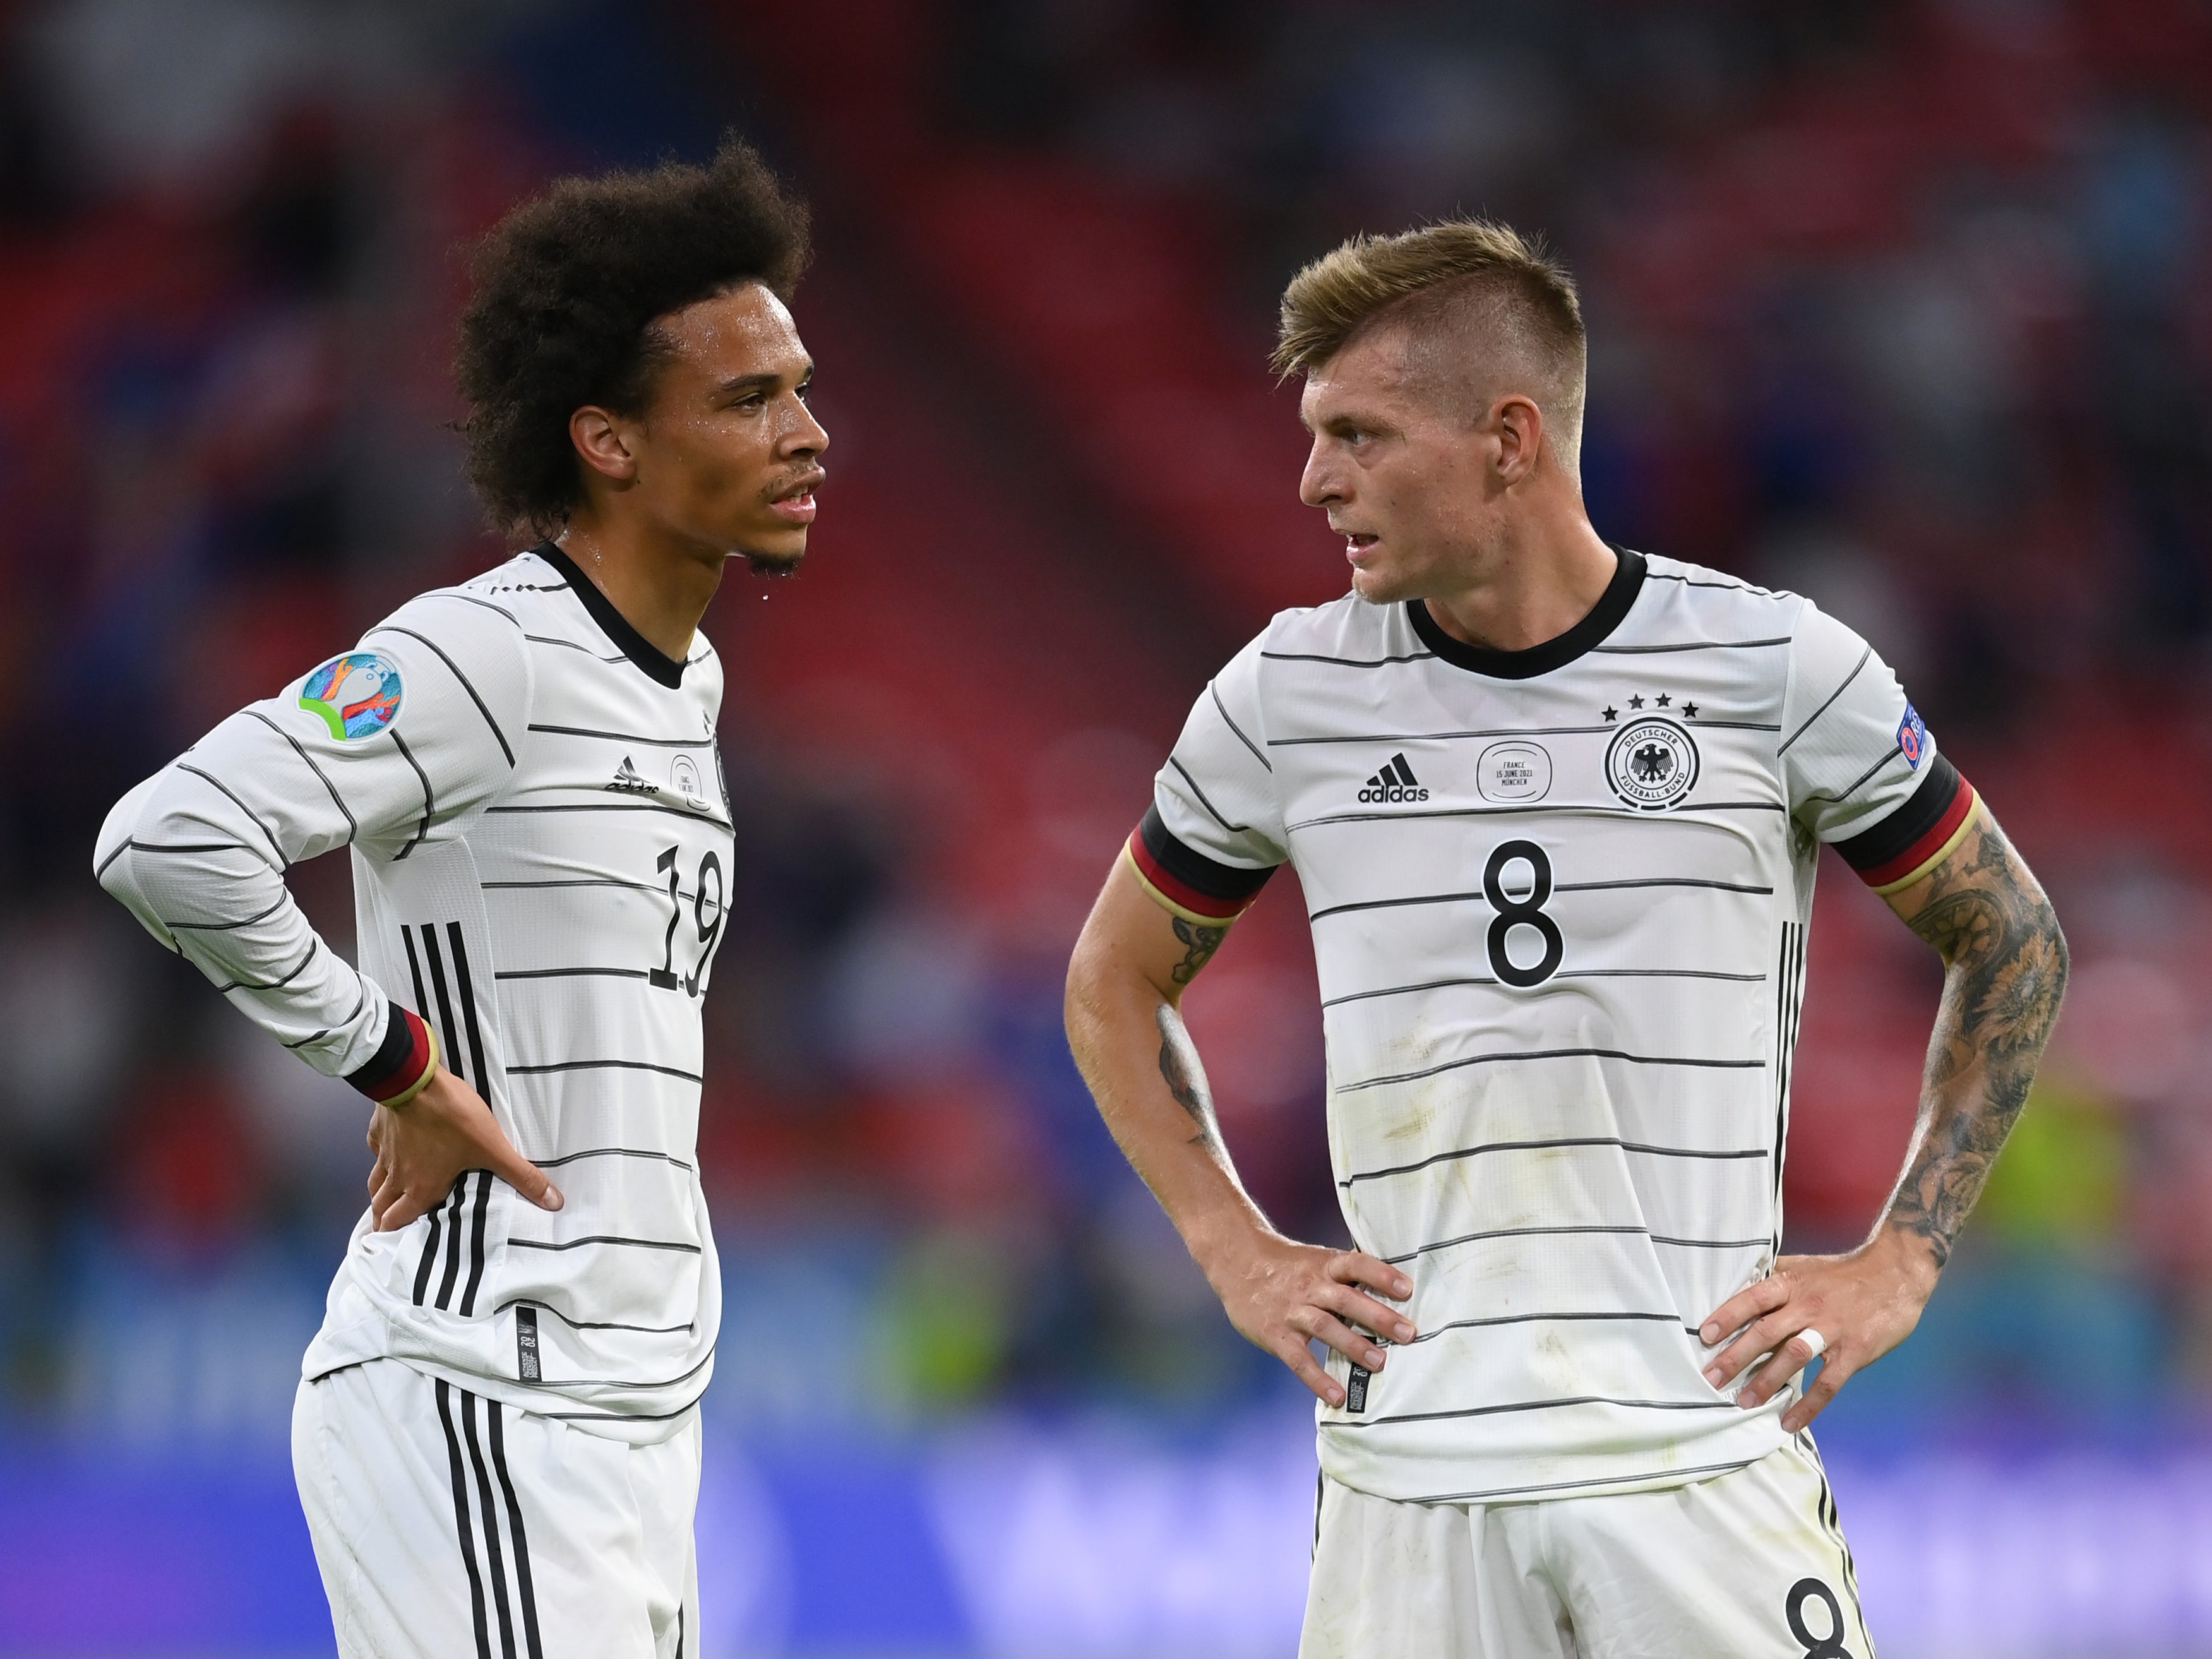 Germany have been unpredictable at the tournament so far